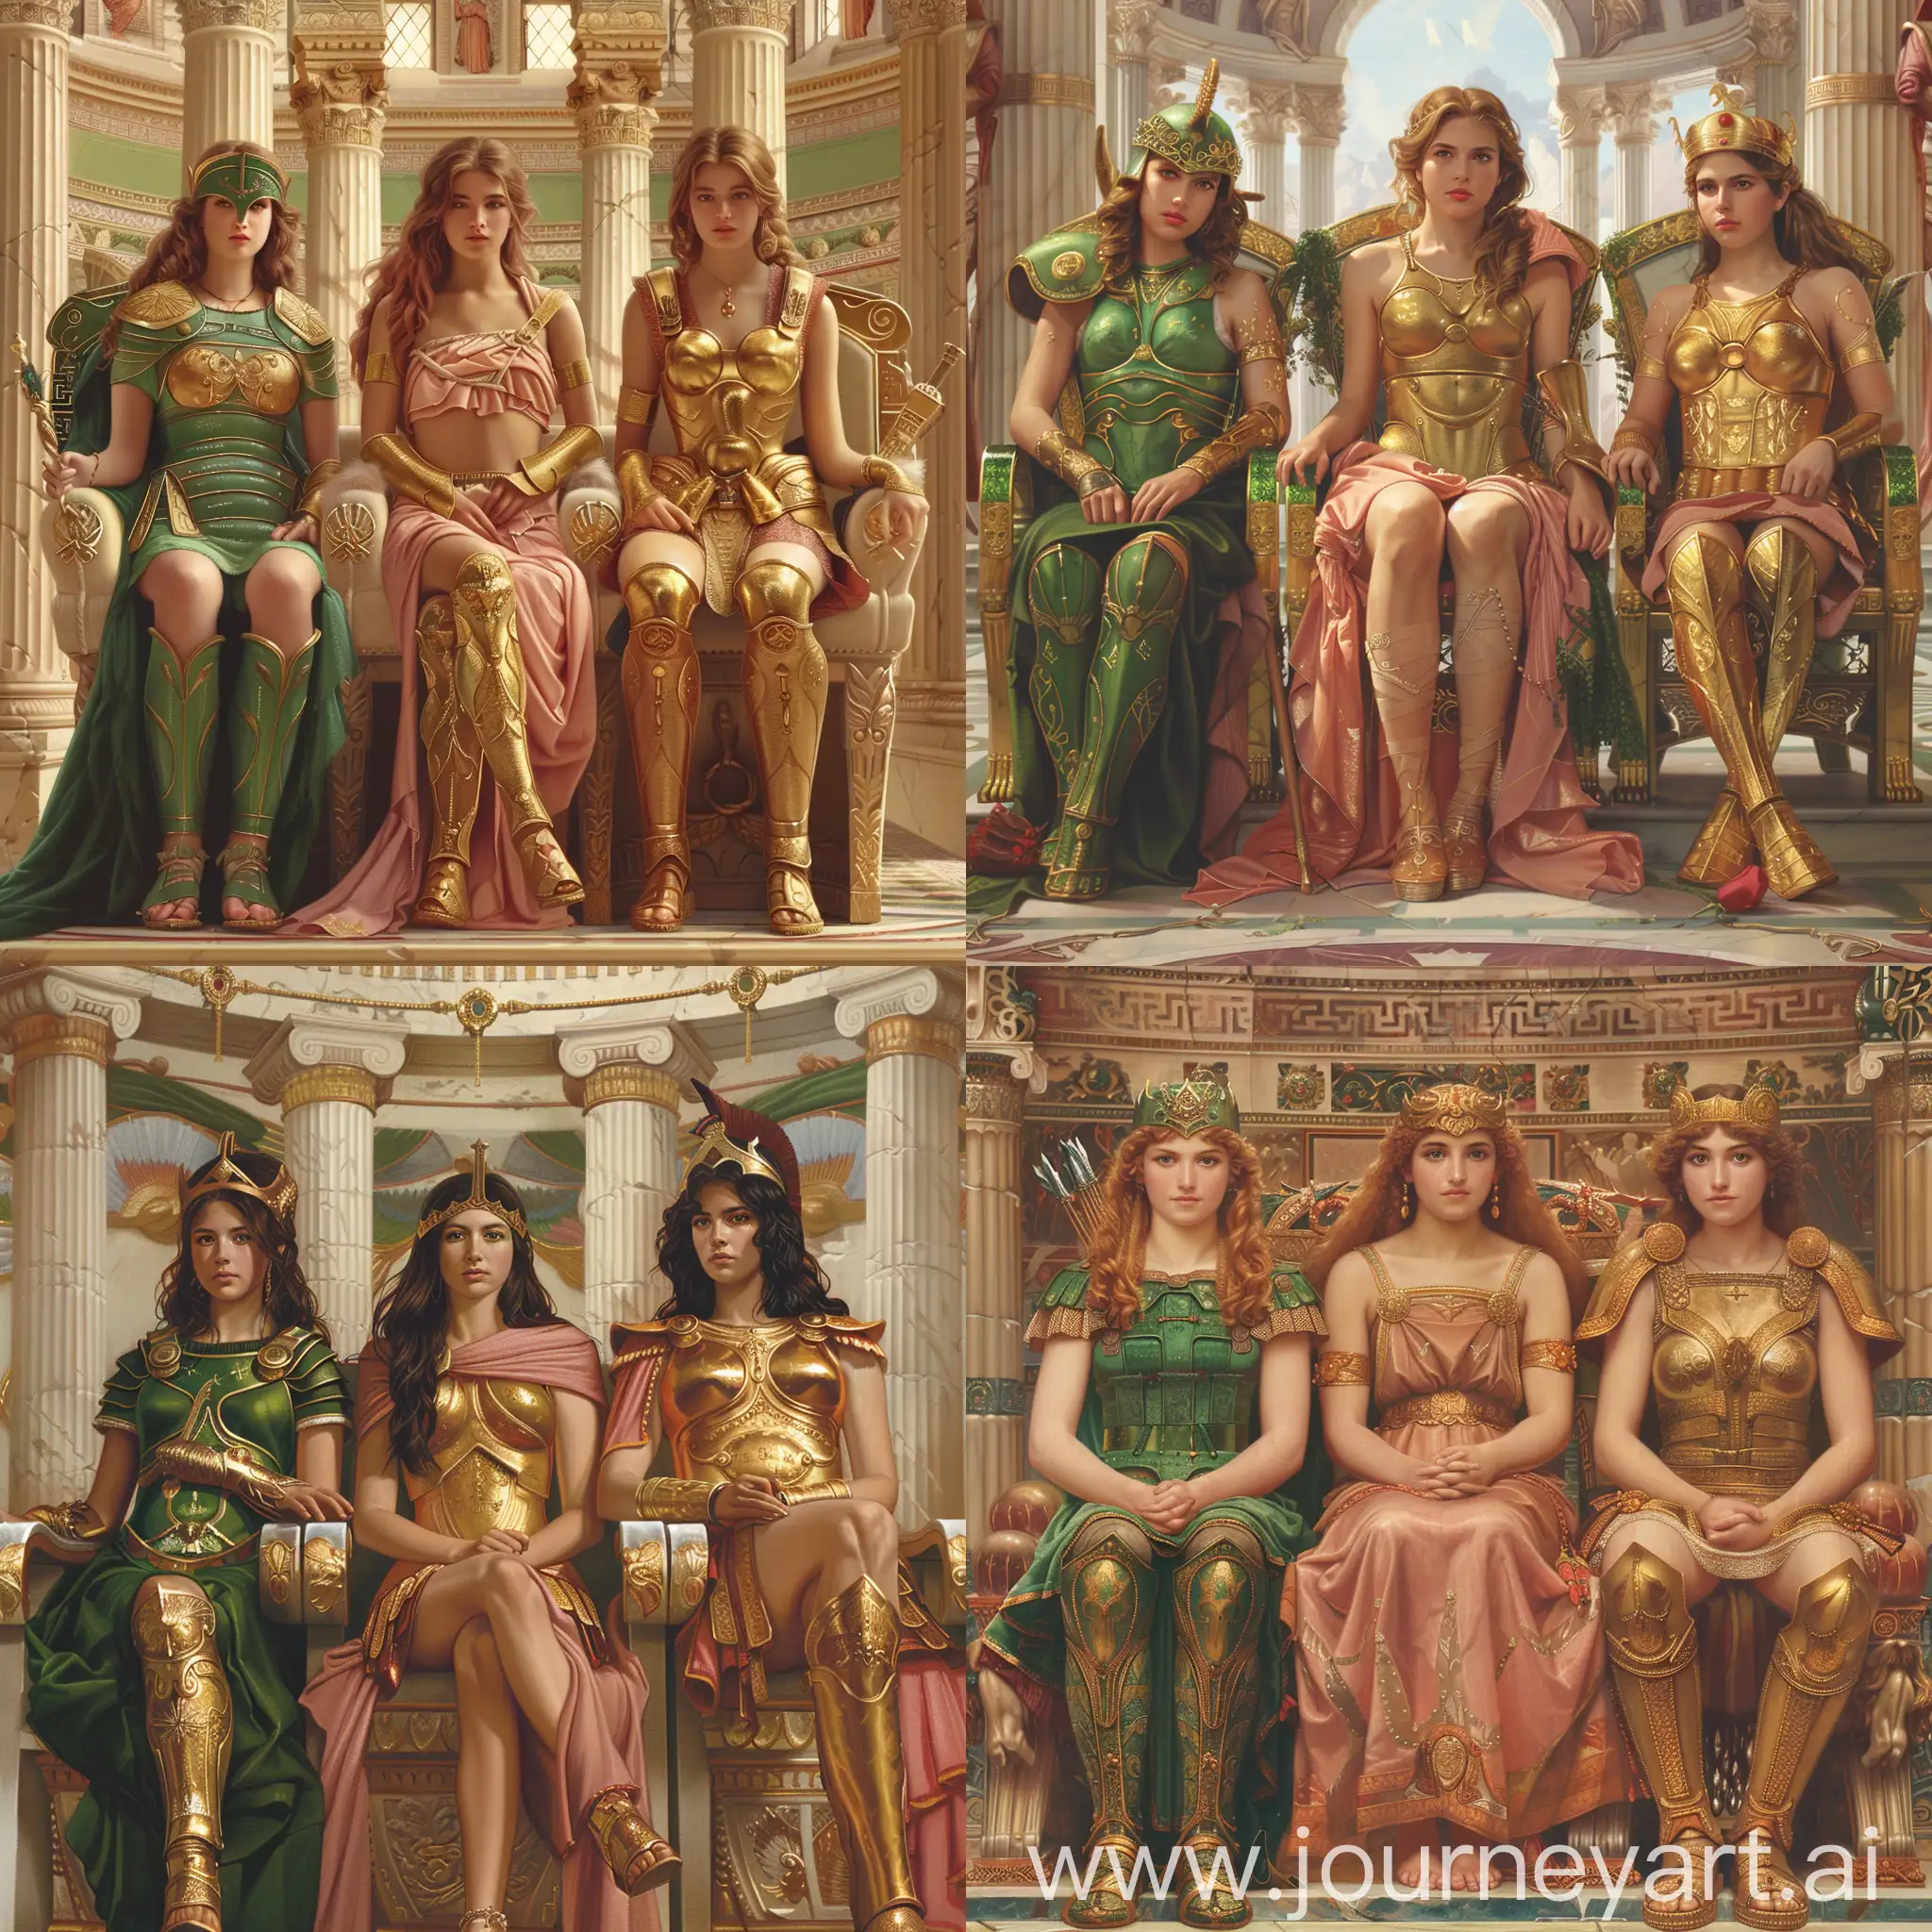 Three young Greek goddesses are sitting on their imperial thrones.

The left one is Artemis in green armor.
The middle one is Aphrodite in rose clothes.
The right one is Athena in golden armor.

They are all inside a splendid greek temple.